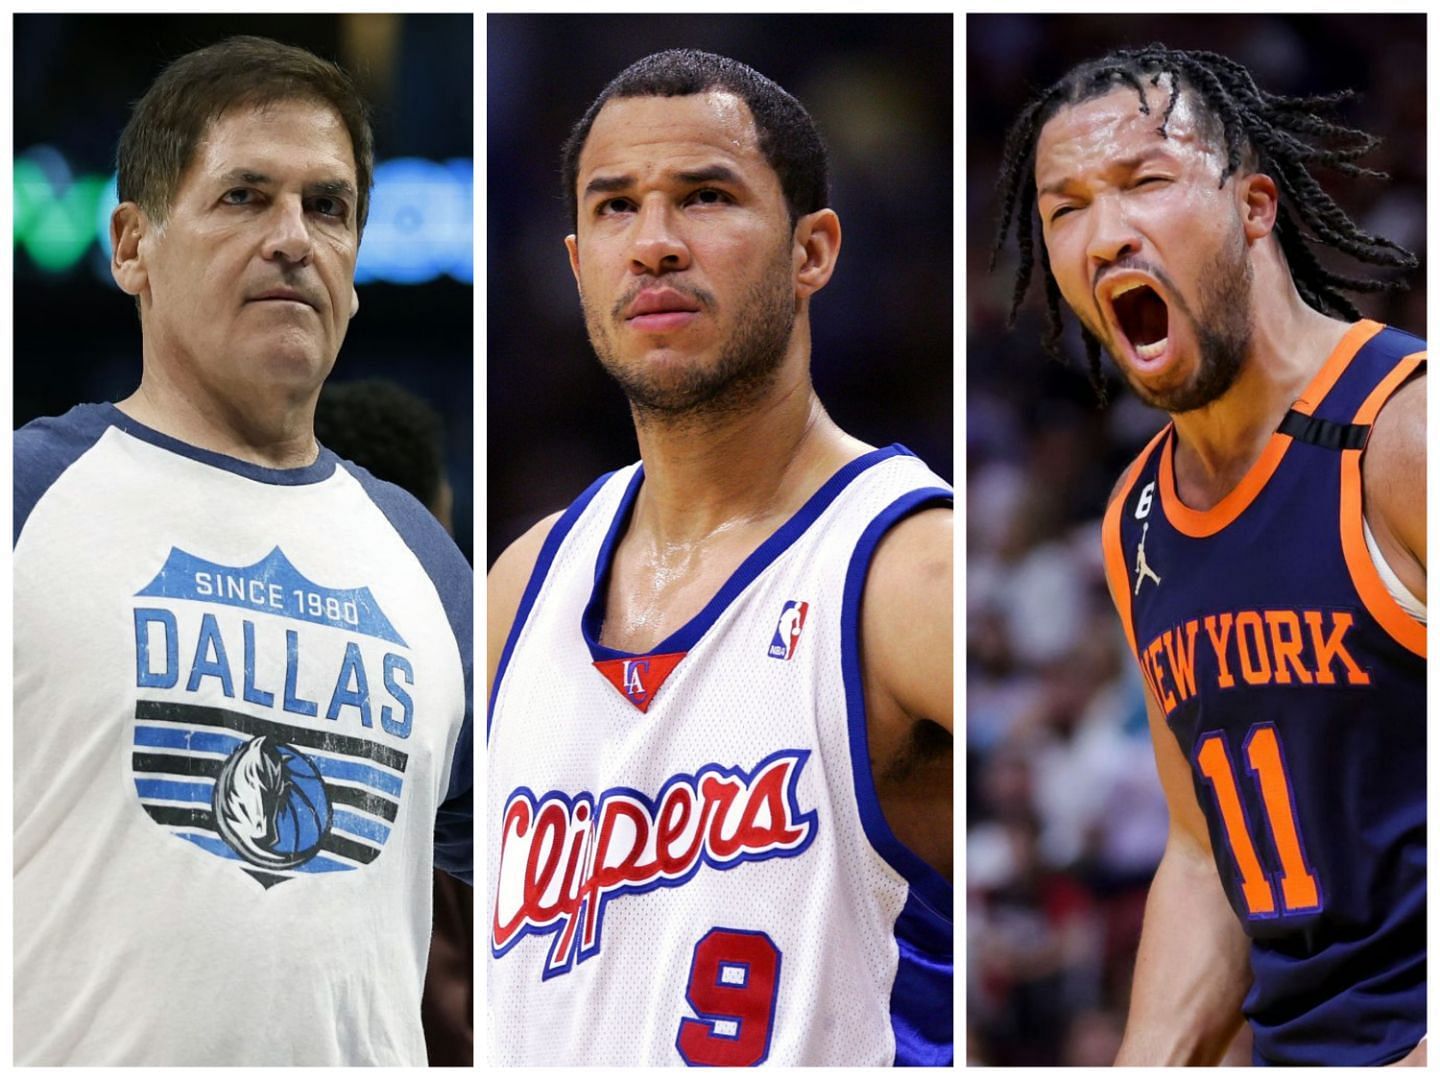 "His dad is really running the show" - Mark Cuban blames Jalen Brunson